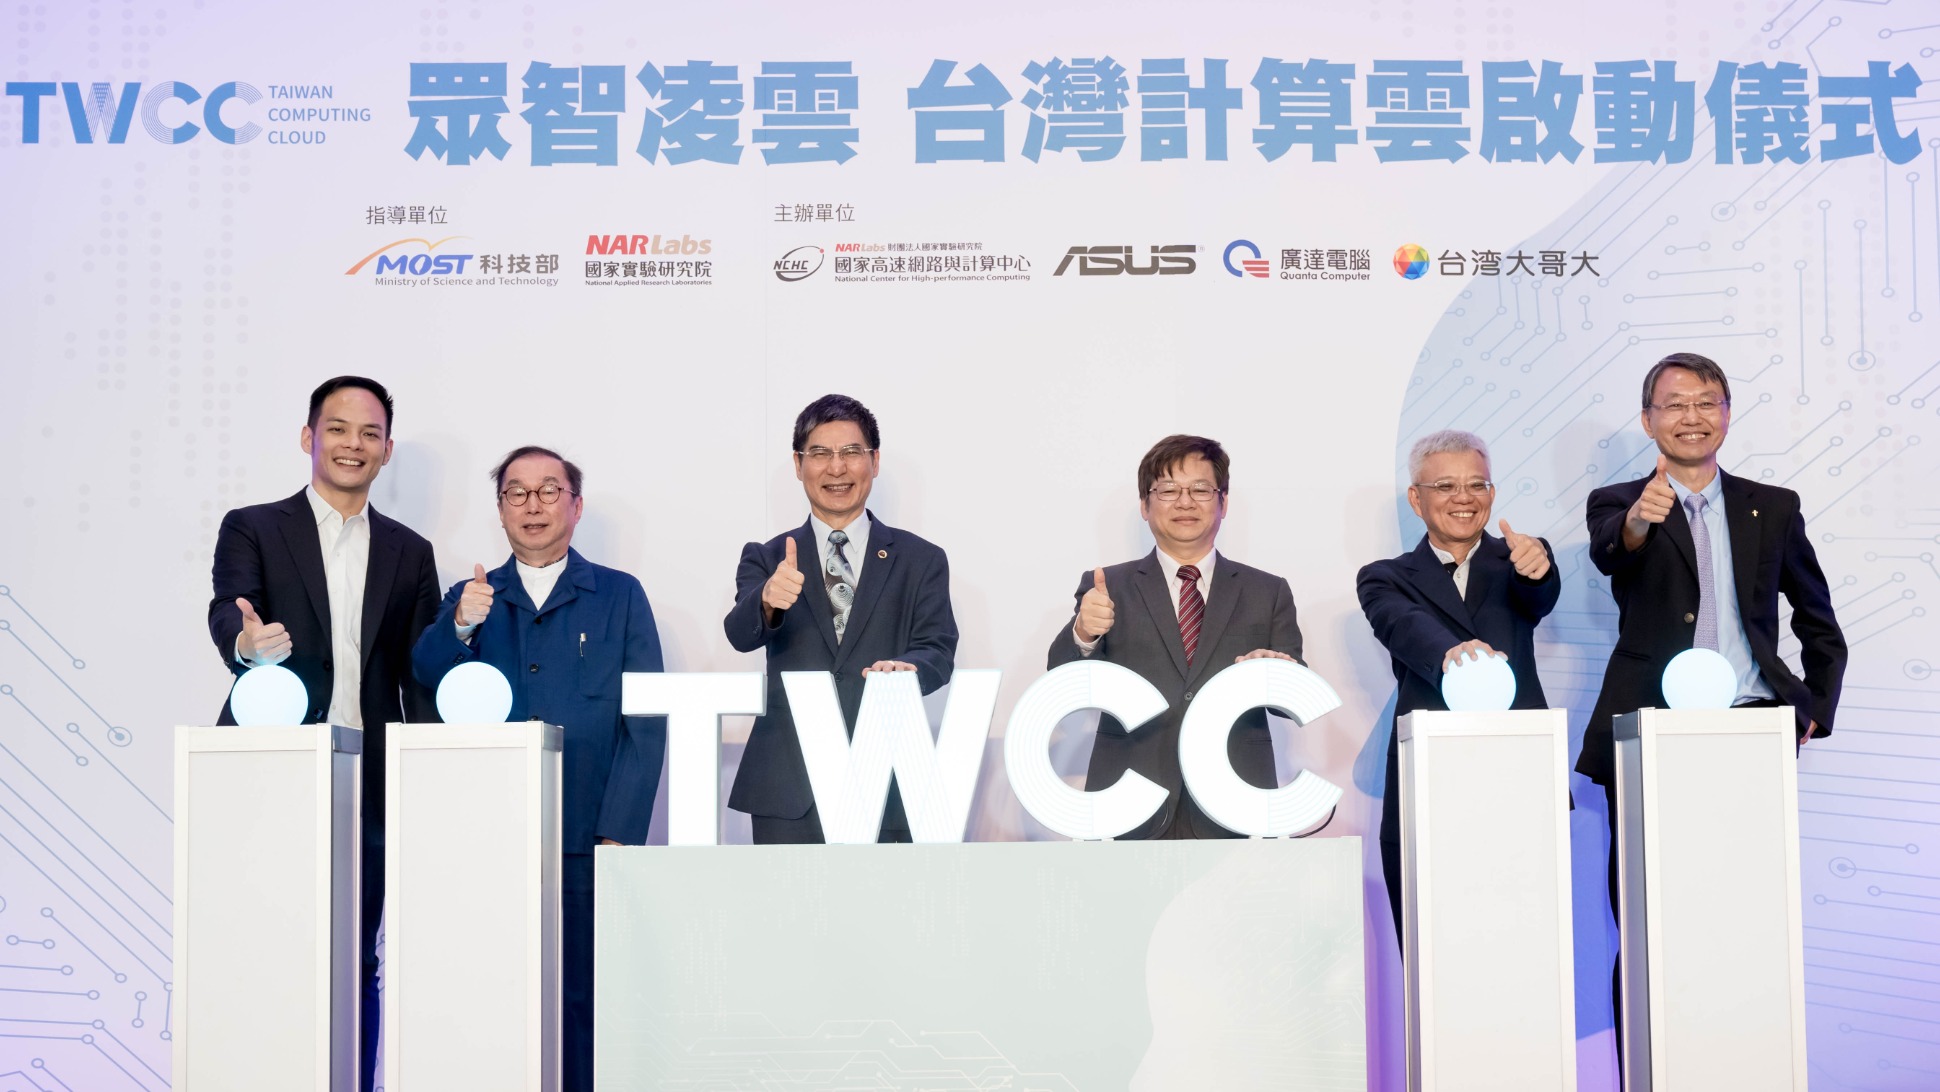 TWCC-Taiwan Computing Cloud officially debuts (From left, Taiwan Mobile GM Jamie Lin, Quanta Computer Chairman Barry Lam…etc.